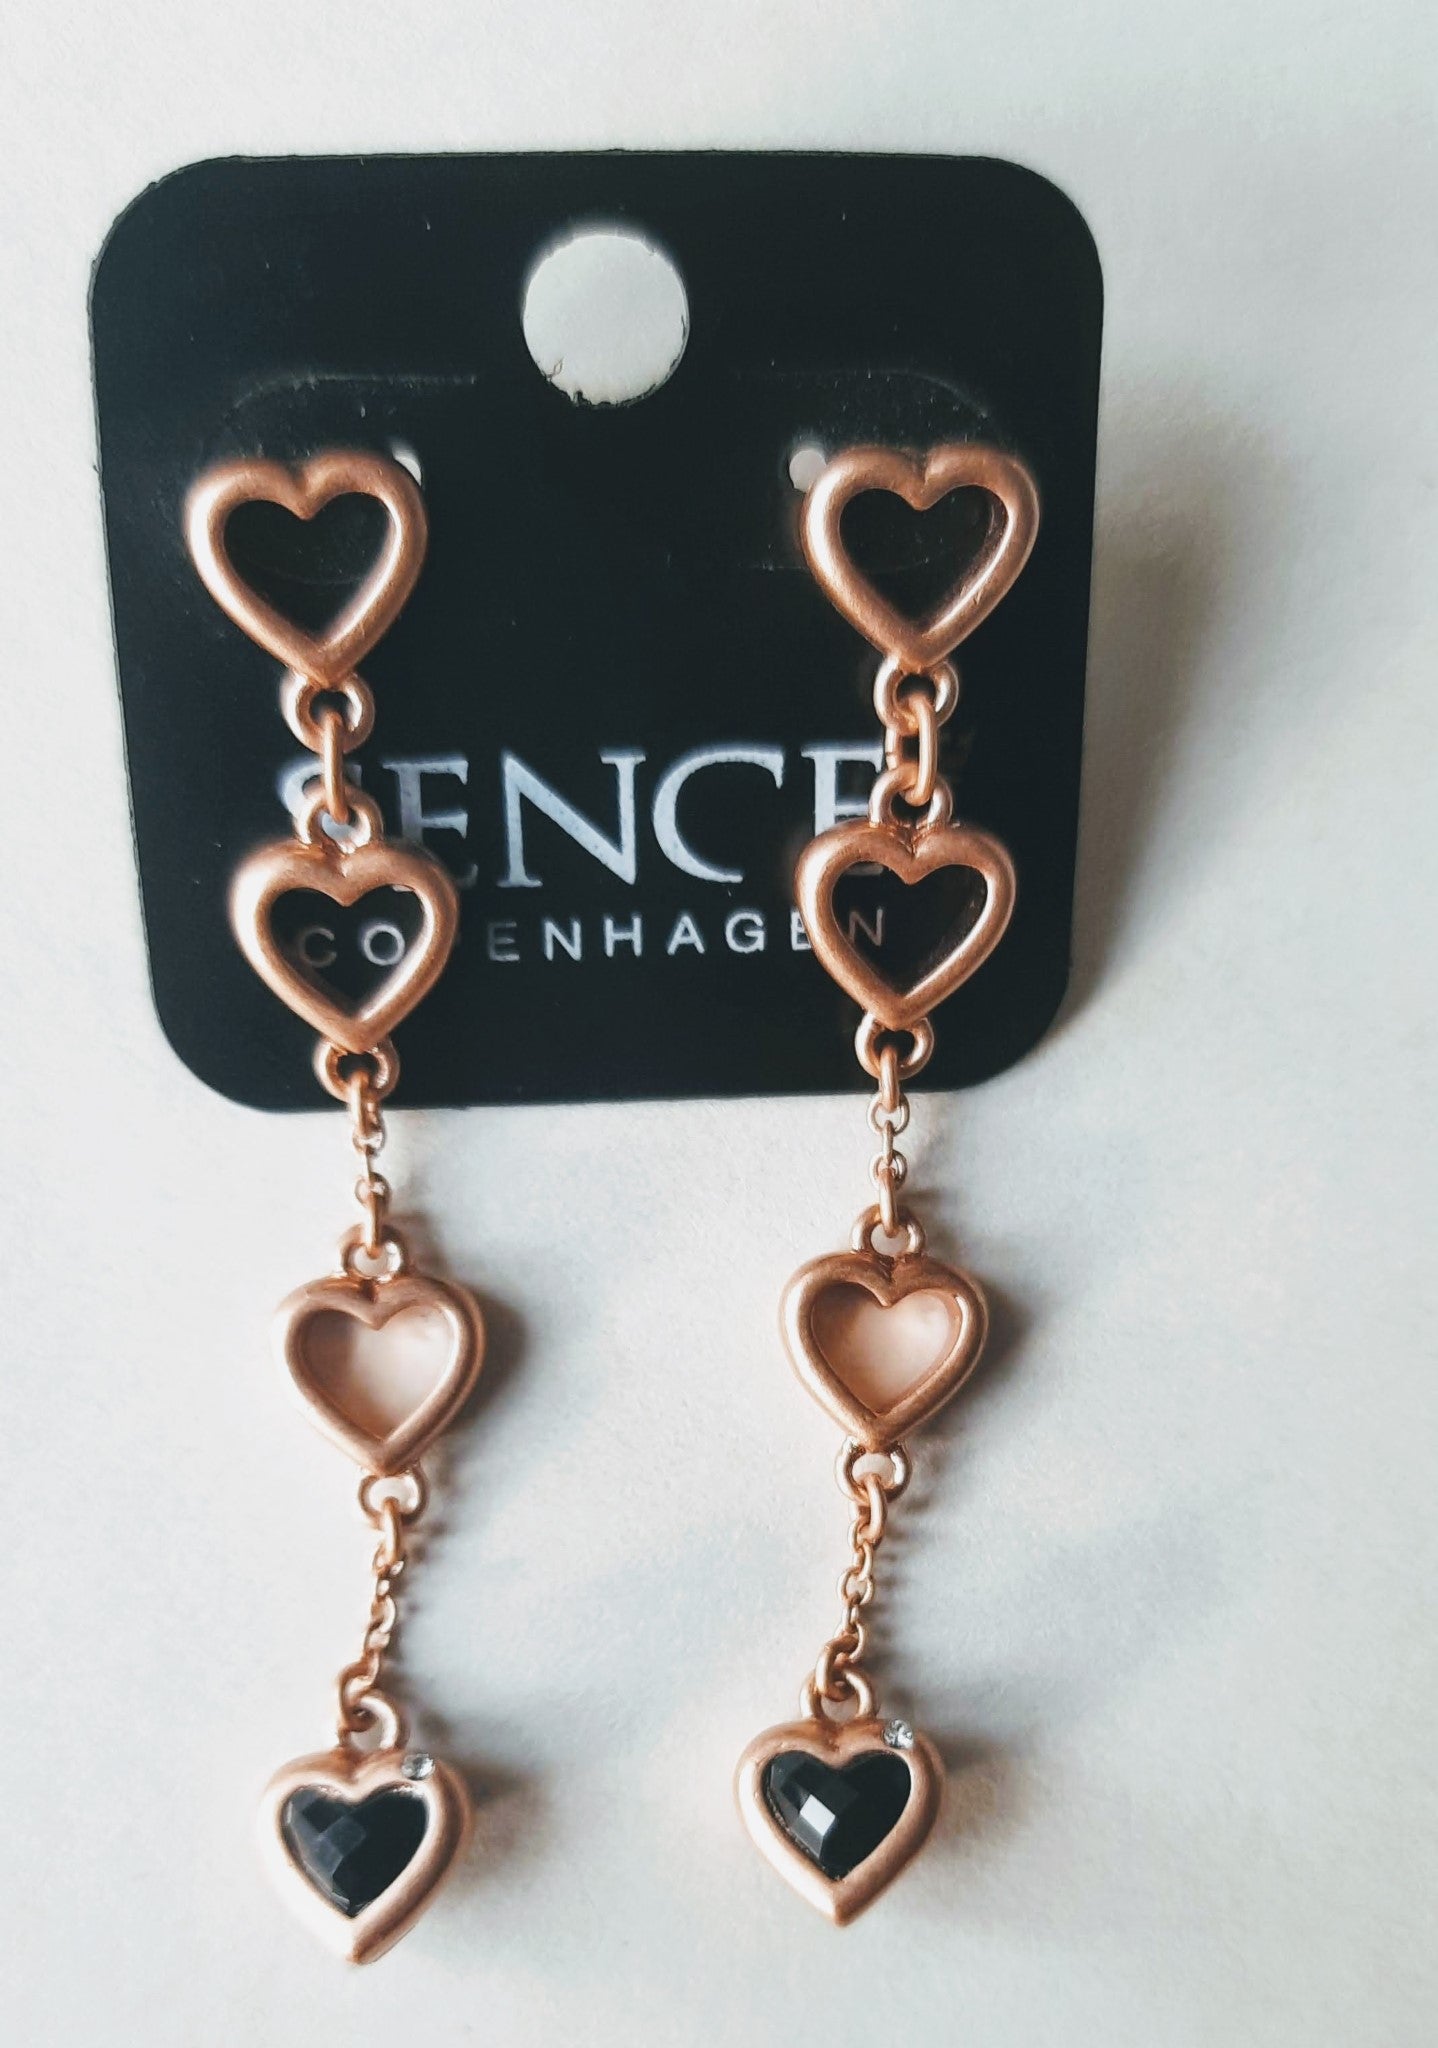 Sence Heart Earrings in Rose Gold with Black Onyx Stone